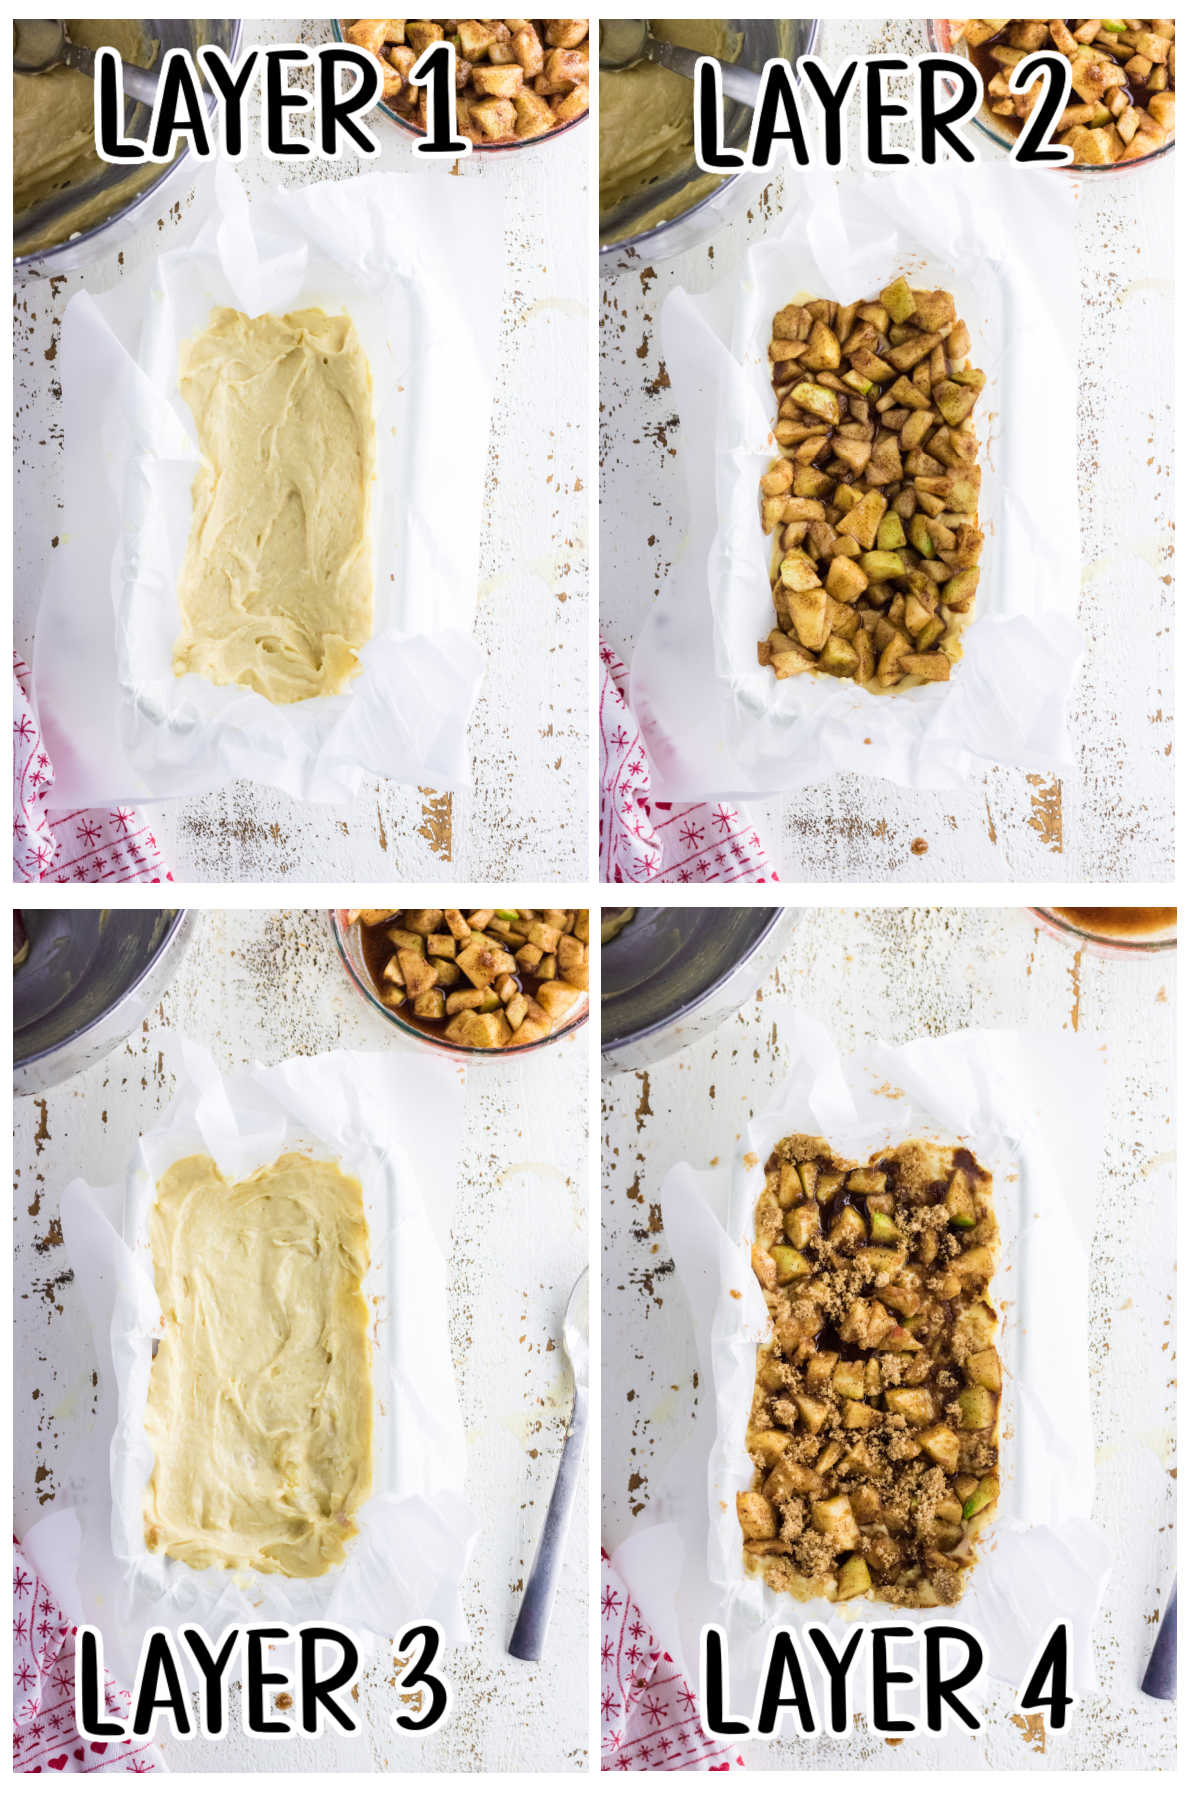 Step by step images showing how to layer apple fritter bread.